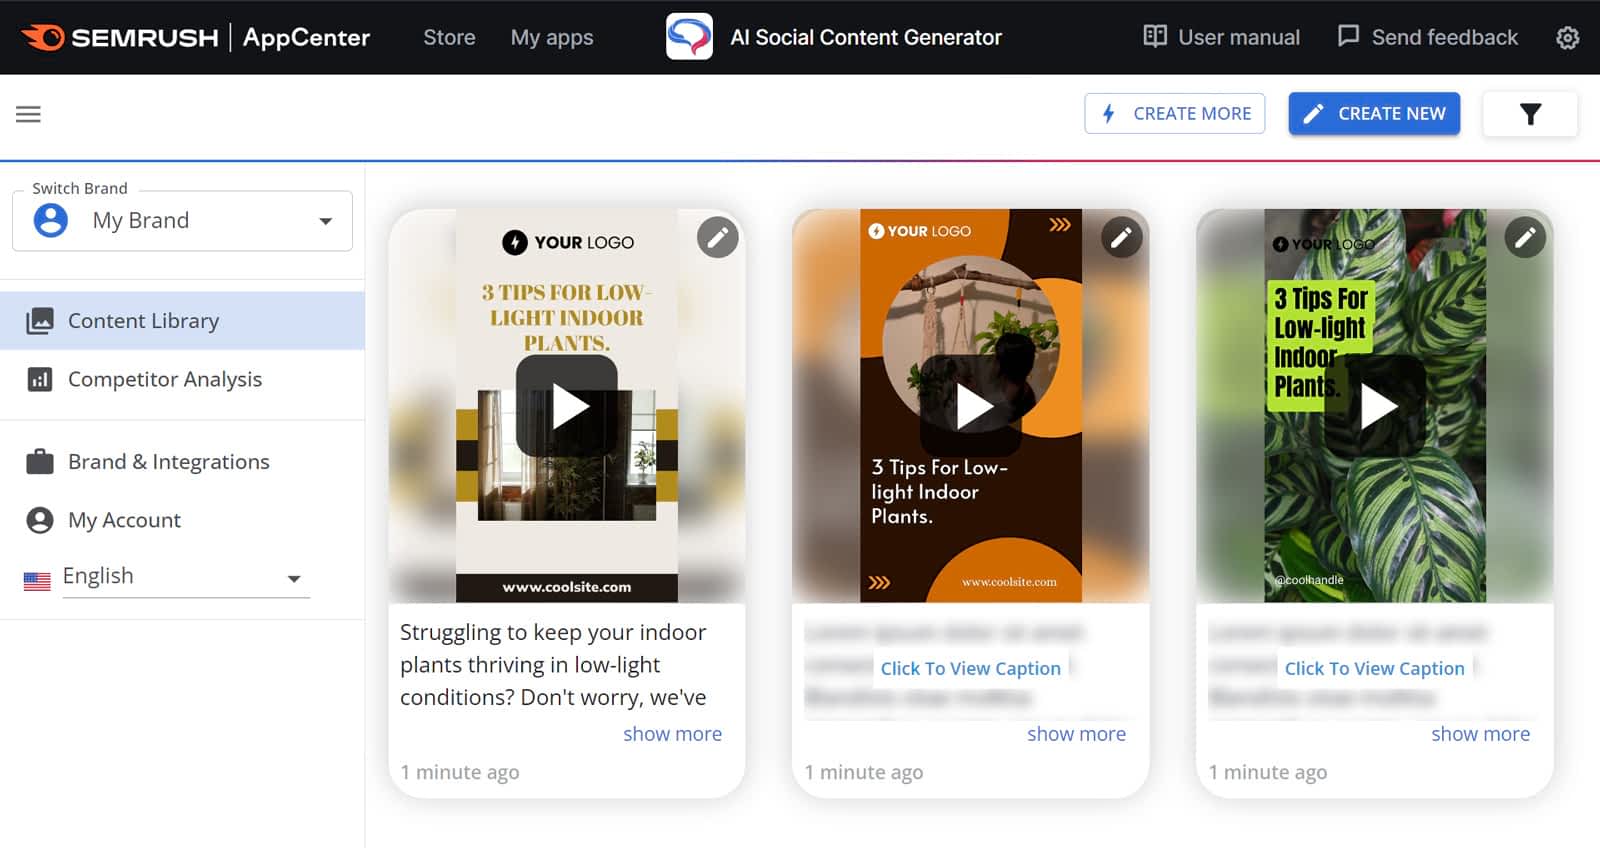 Semrush AI Social Content Generator app Content Library showing three AI generated posts.